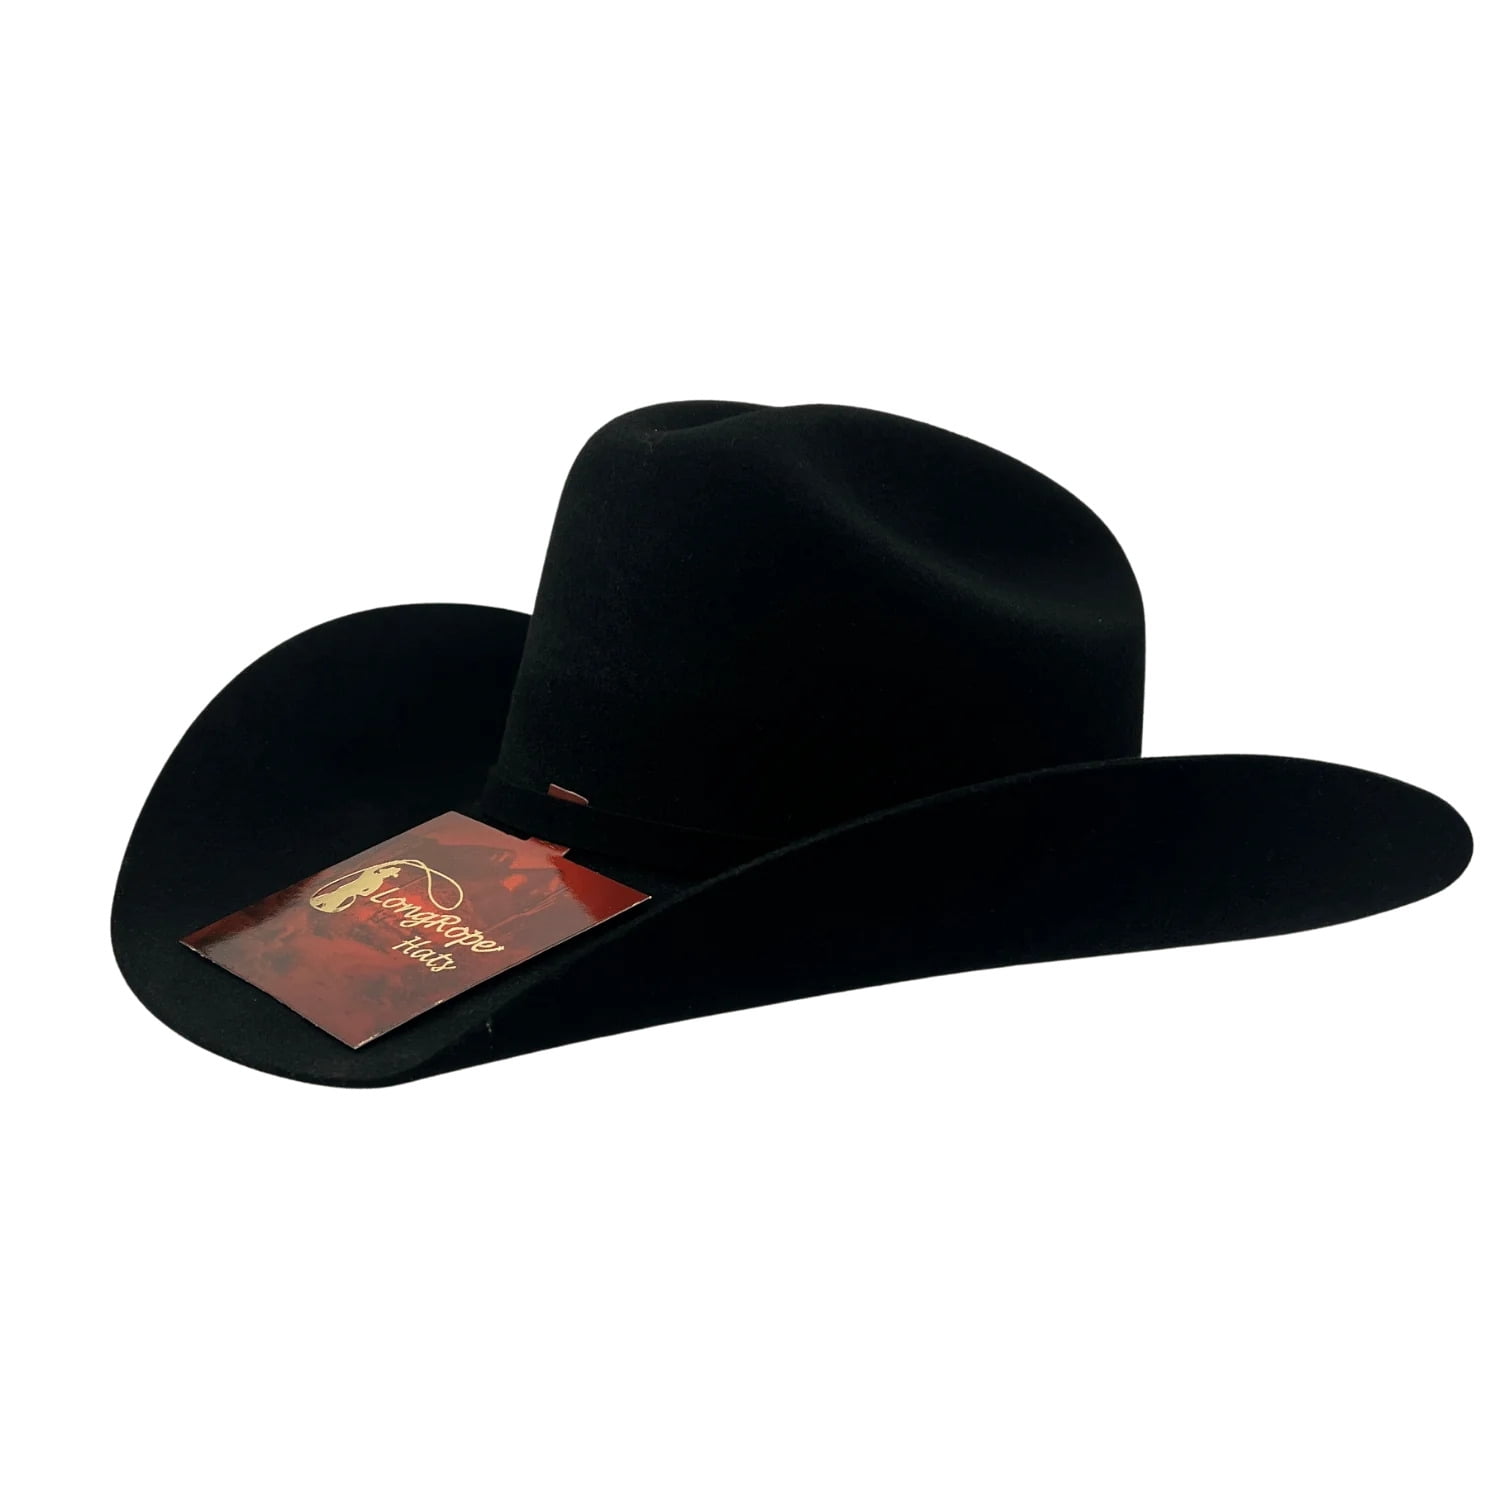 Cowboy 4-Way Wooden Hat Stretcher for Adults One Size from 7-1/2 to  9-1/2(Black)